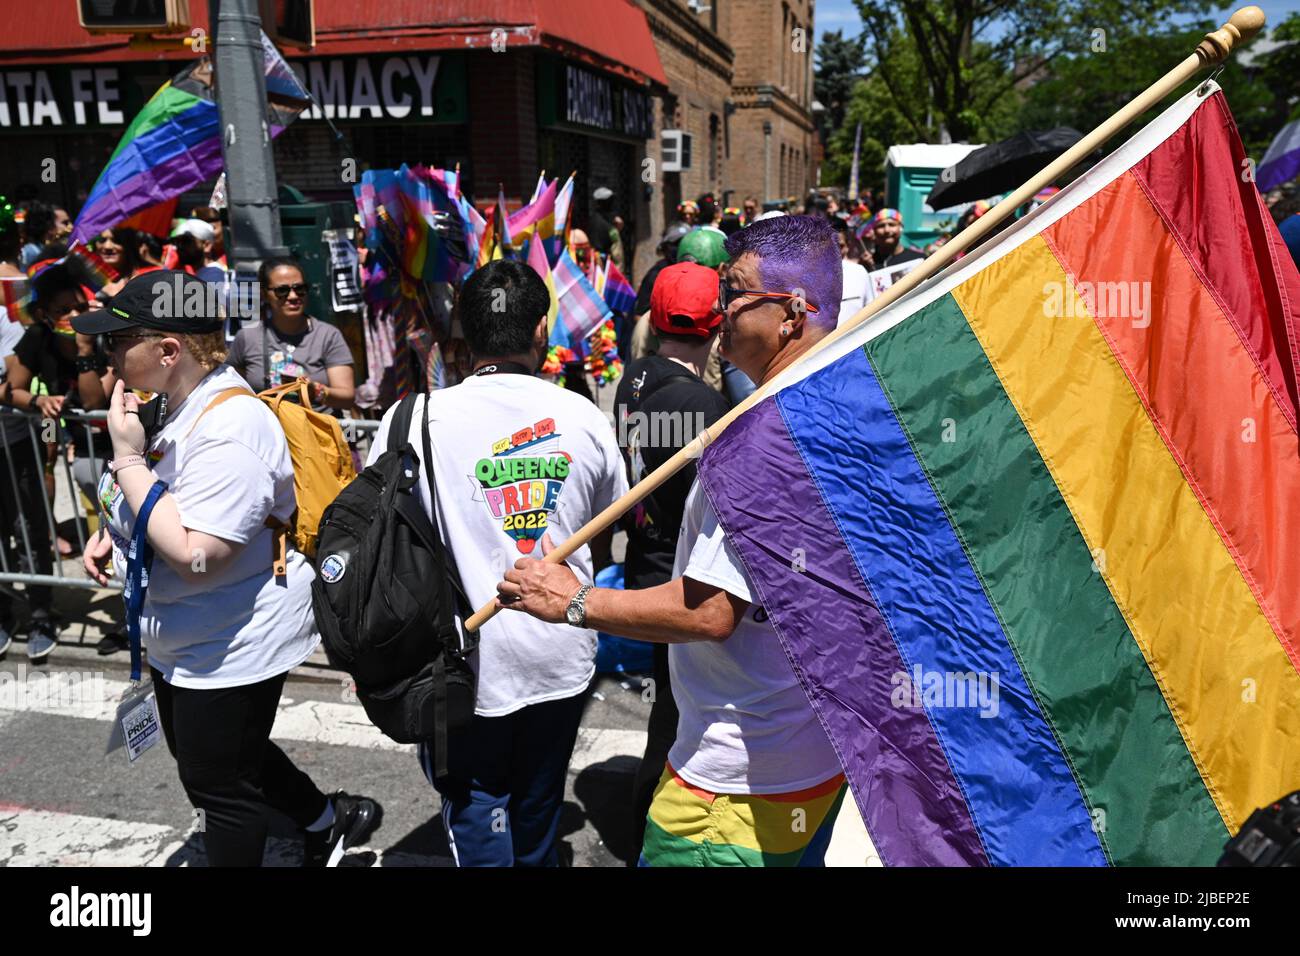 People attend the 30th Annual Queens Pride Parade on June 5, 2022 in